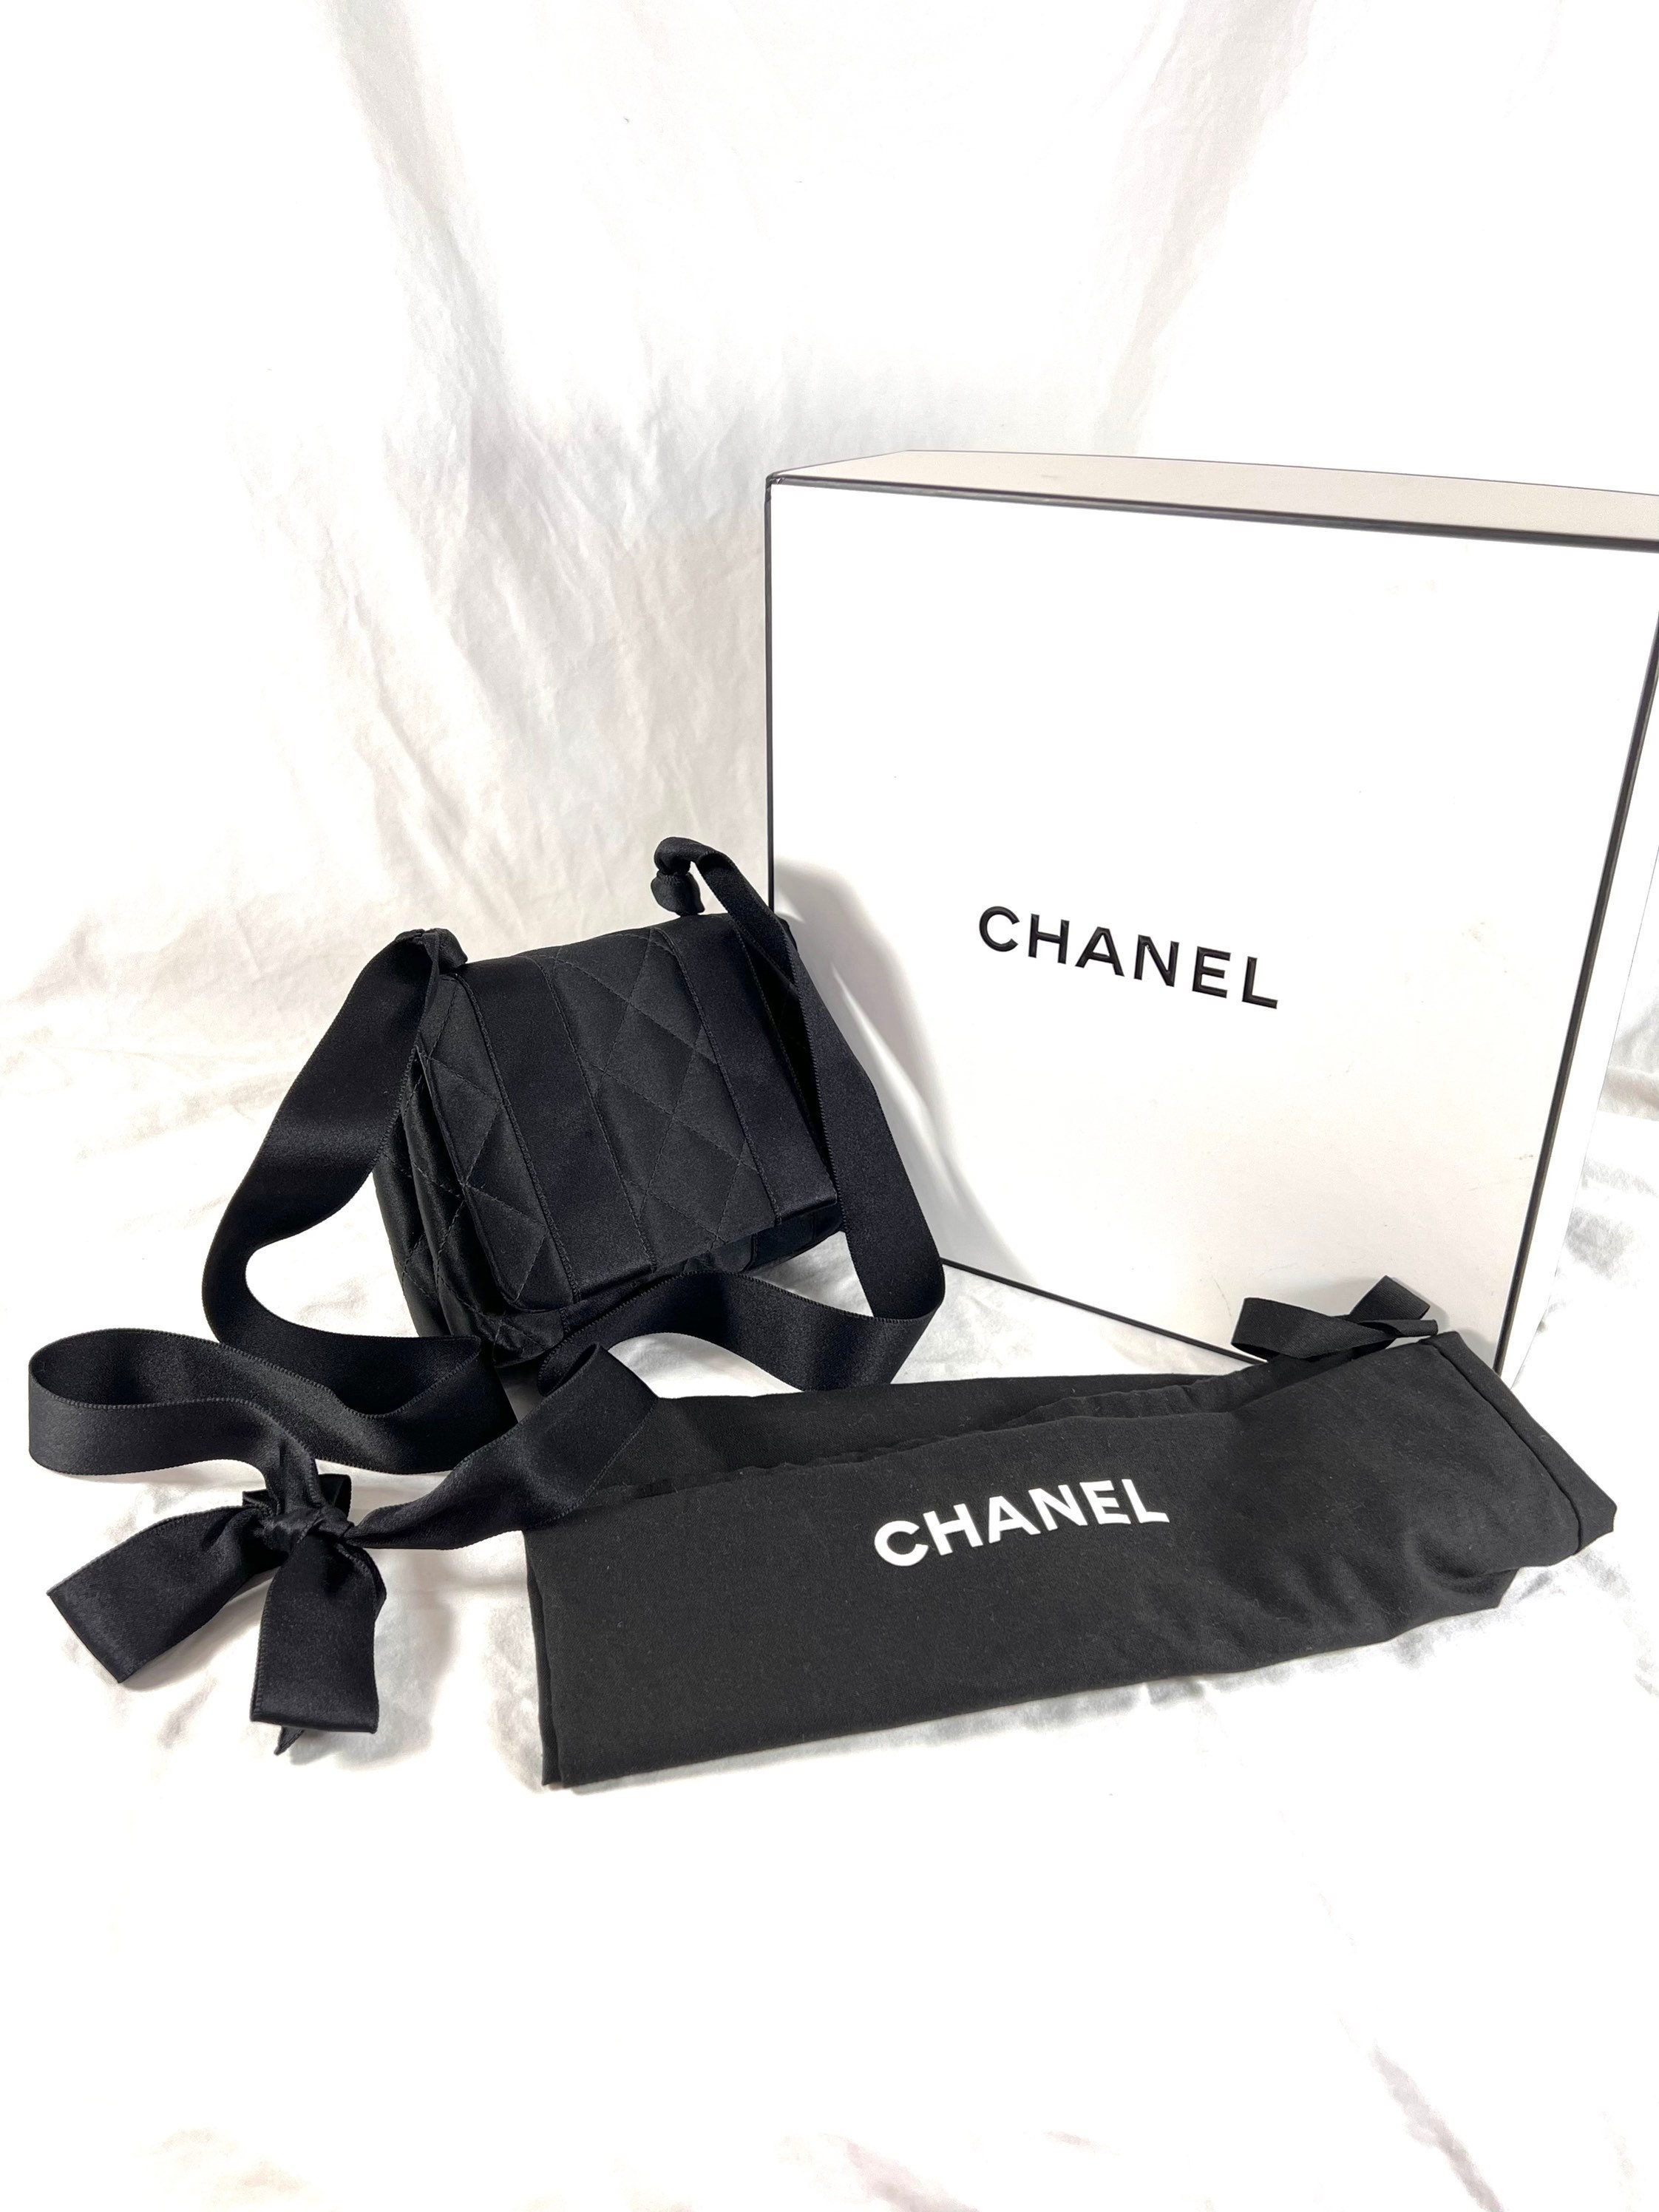 JPNP on Twitter Chanel precision vip gift bag Color blackbeigebrowngray  Special990 free ems 100 Authentic Available for sale chanelprecision  chanelpremiumgift chanelvipgift jpnpremiumgift httpstcoJLhvG0dols   X